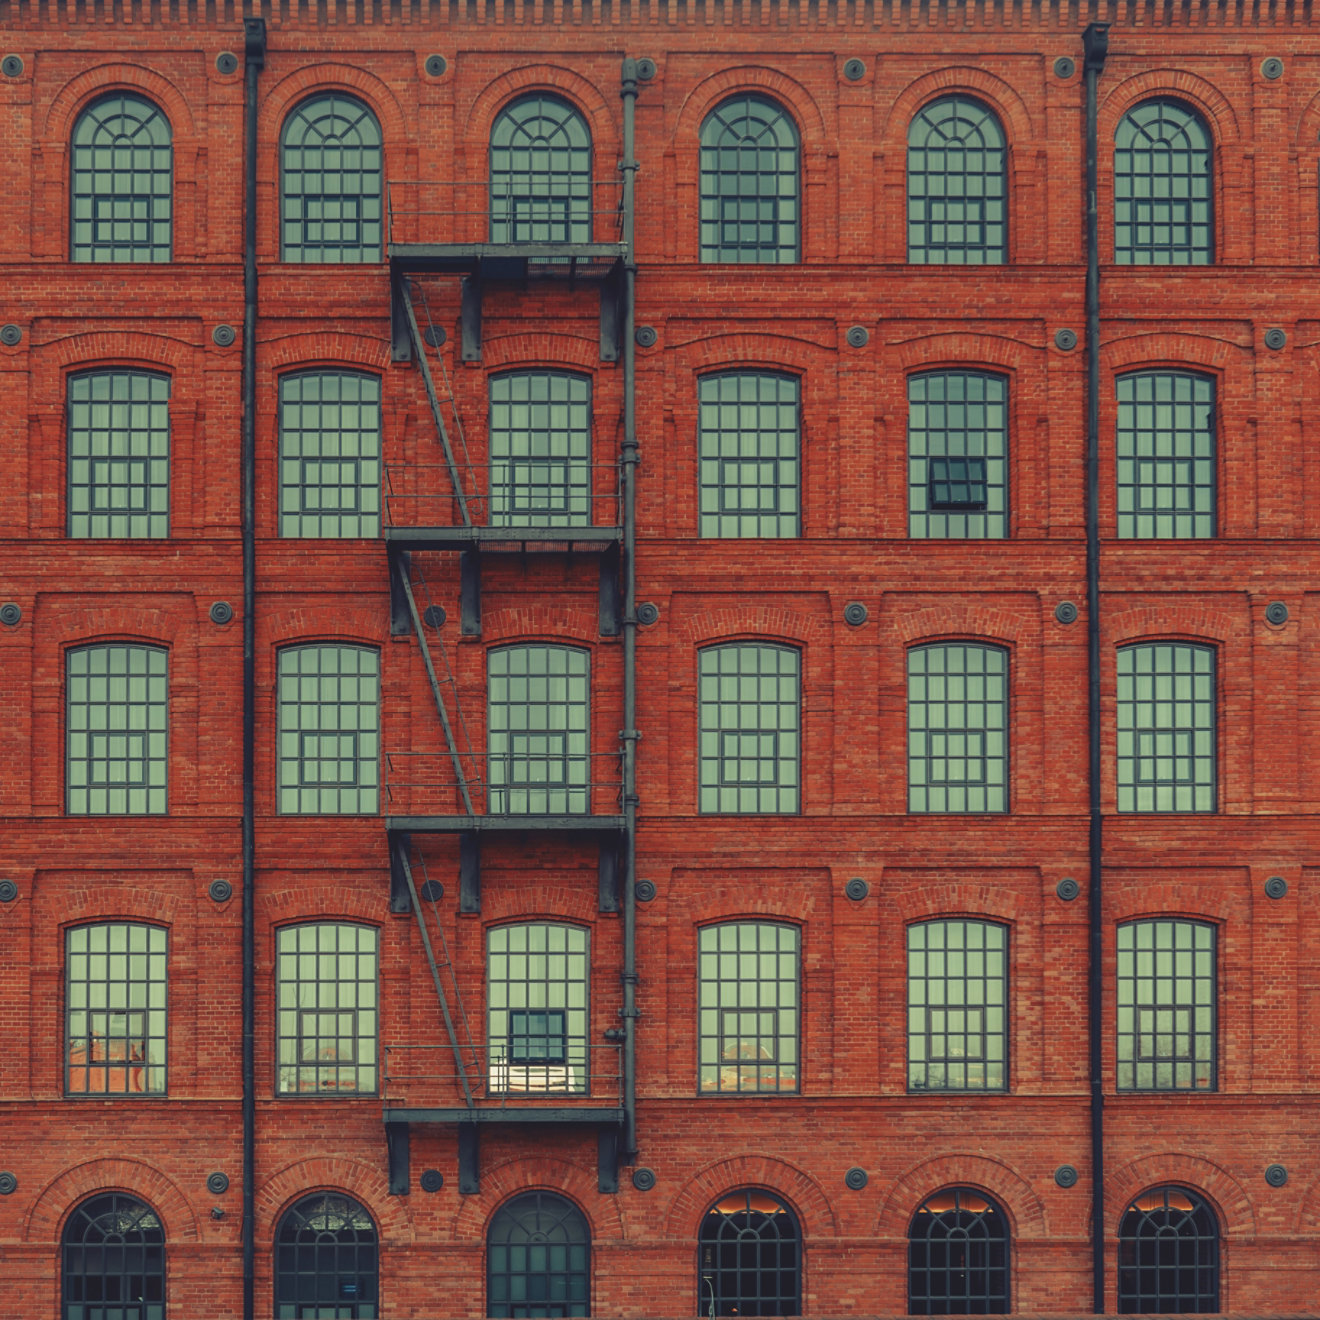 Huge red brick classic industrial building facade with multiple windows and fire escape ladder stairs. Industrial background. Loft inspiration. Construction facade concept. Vintage effect.; Shutterstock ID 642174928; purchase_order: -; job: -; client: -; other: -